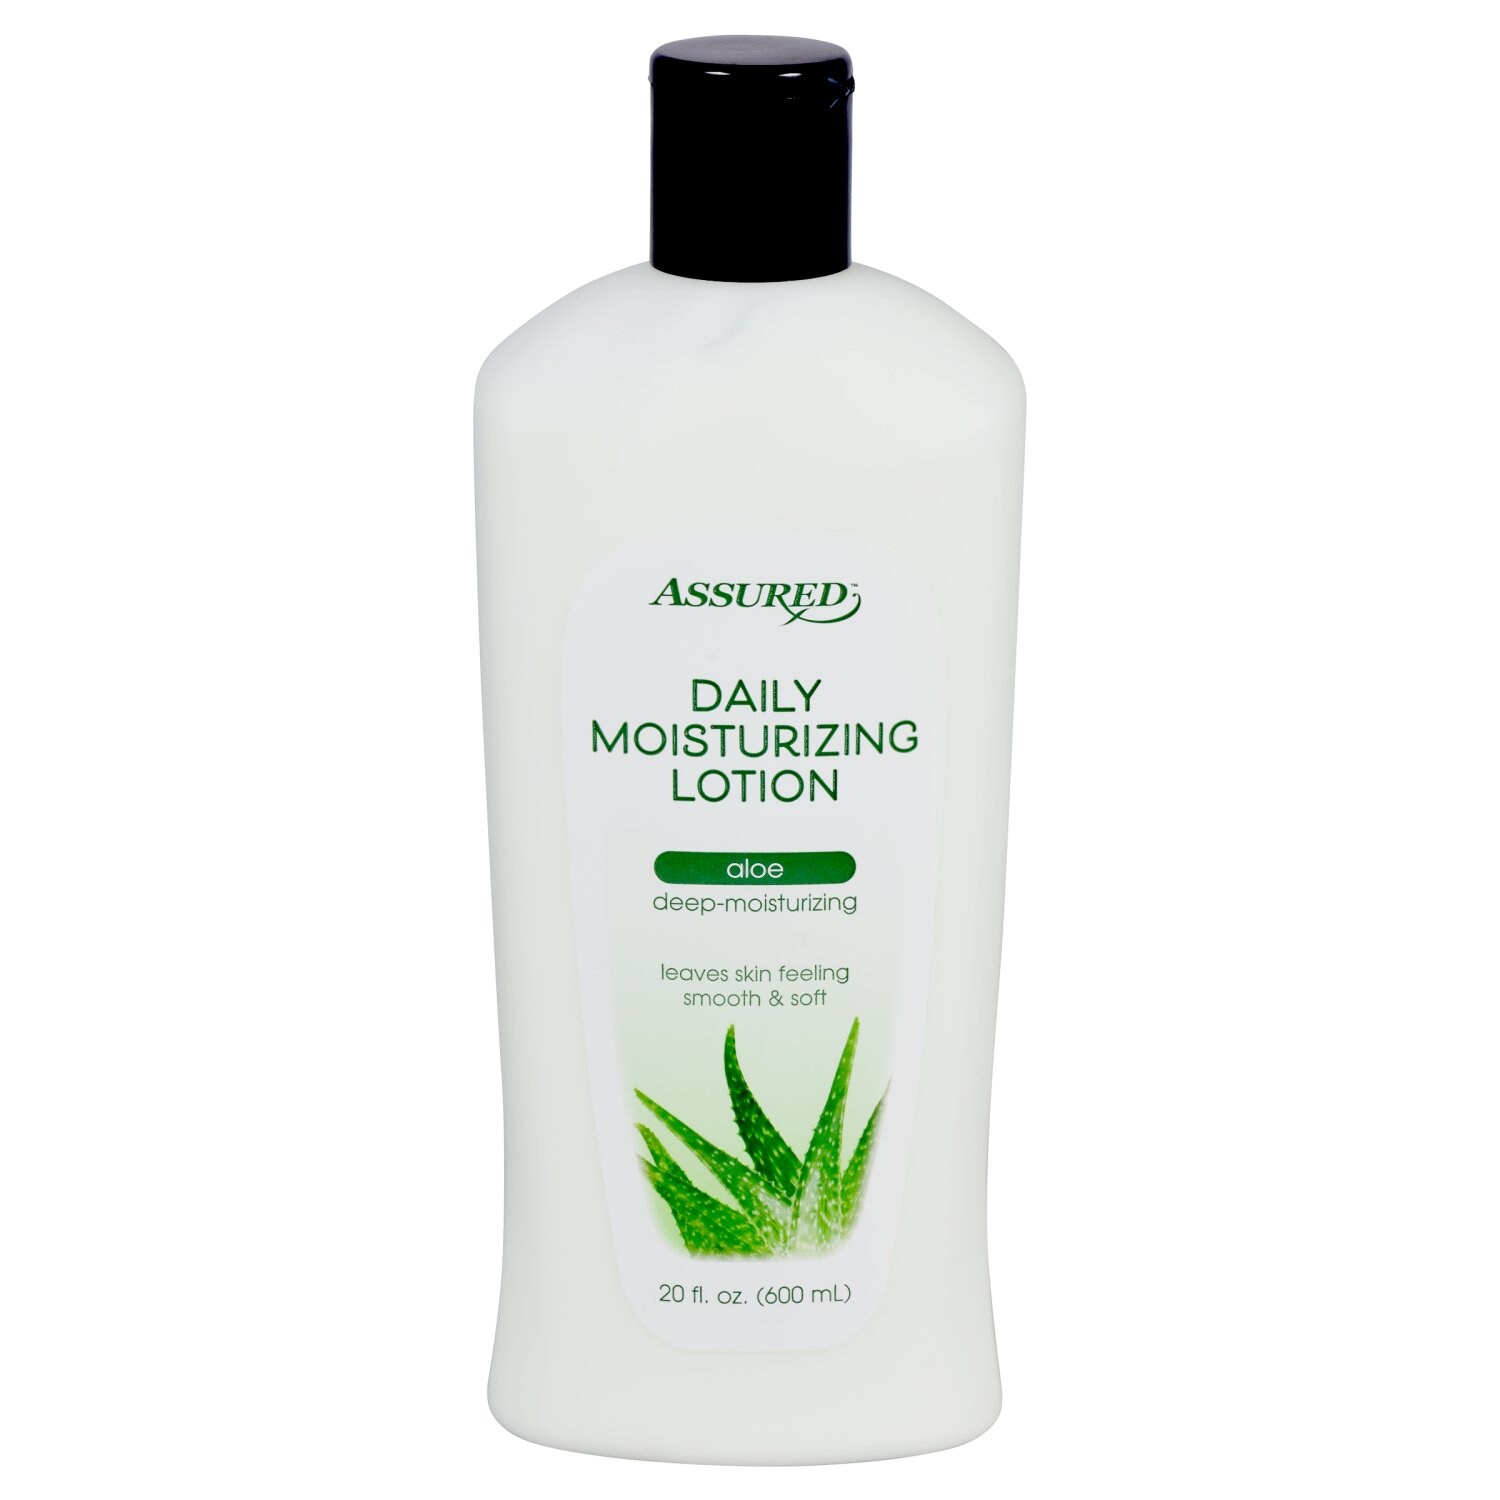 13 Assured daily moisturizing lotion aloe review